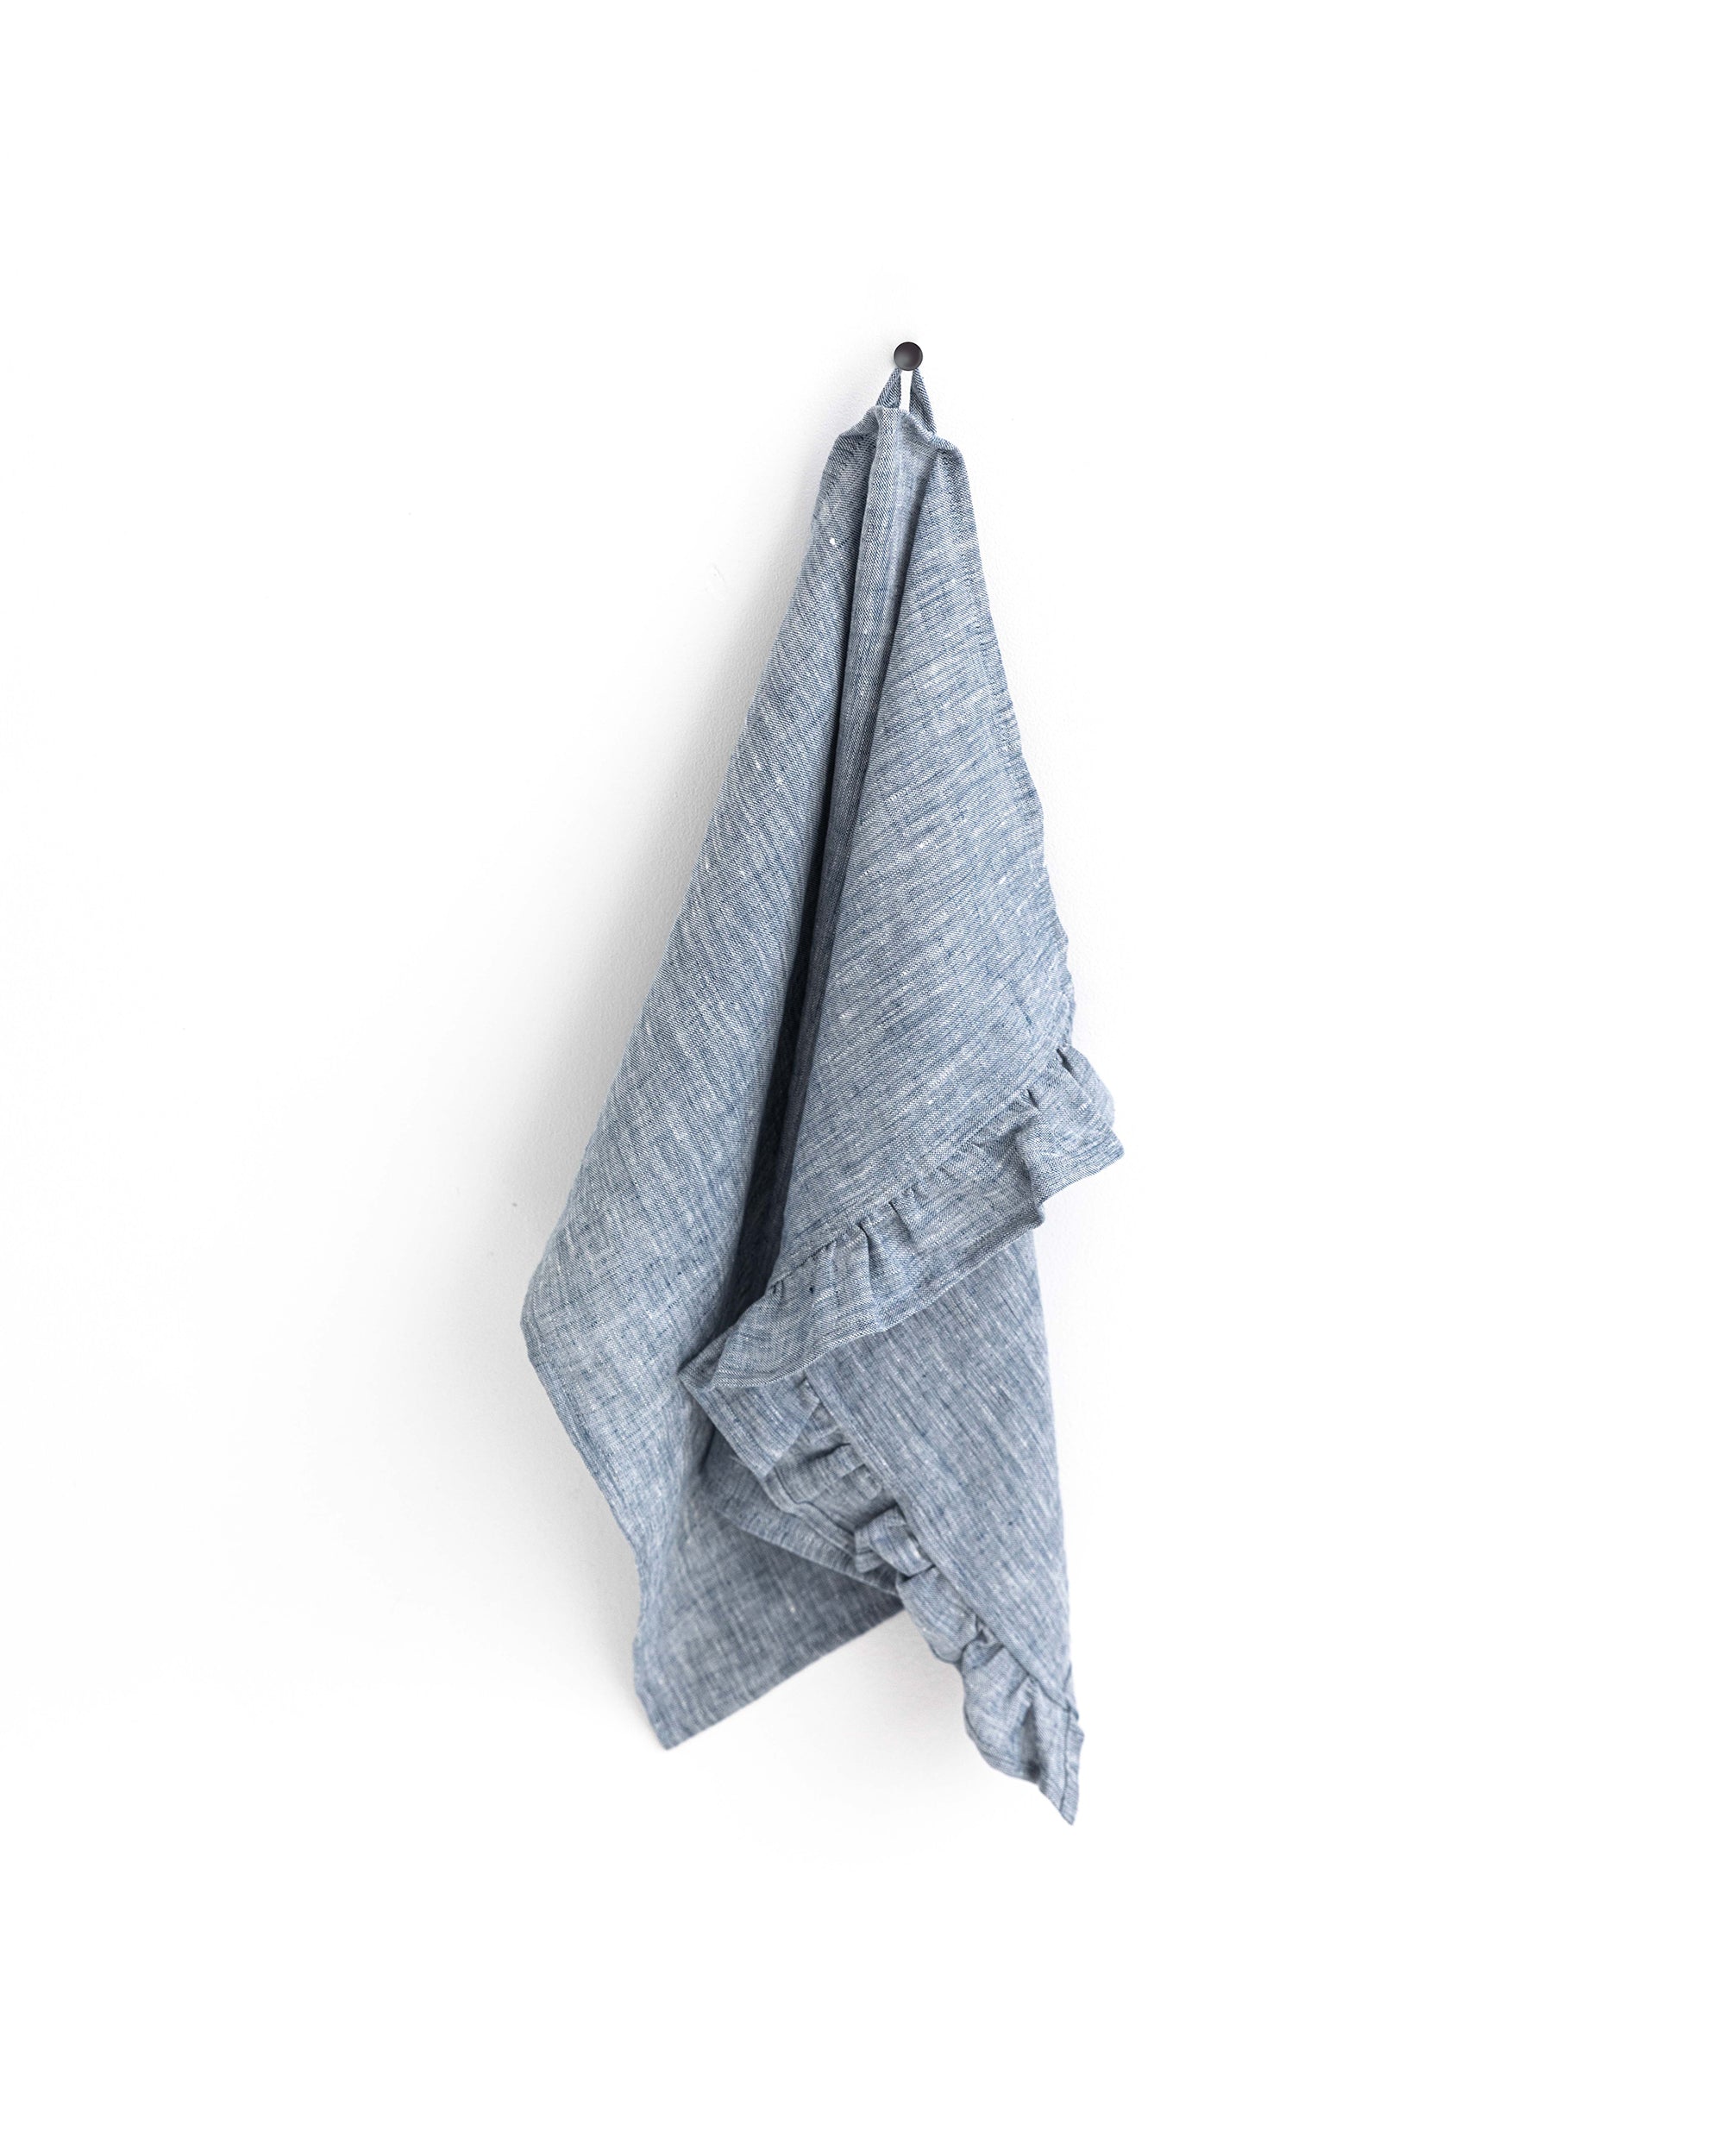 French Style Linen Towels Set of 2, Linen Kitchen Towels With Loop